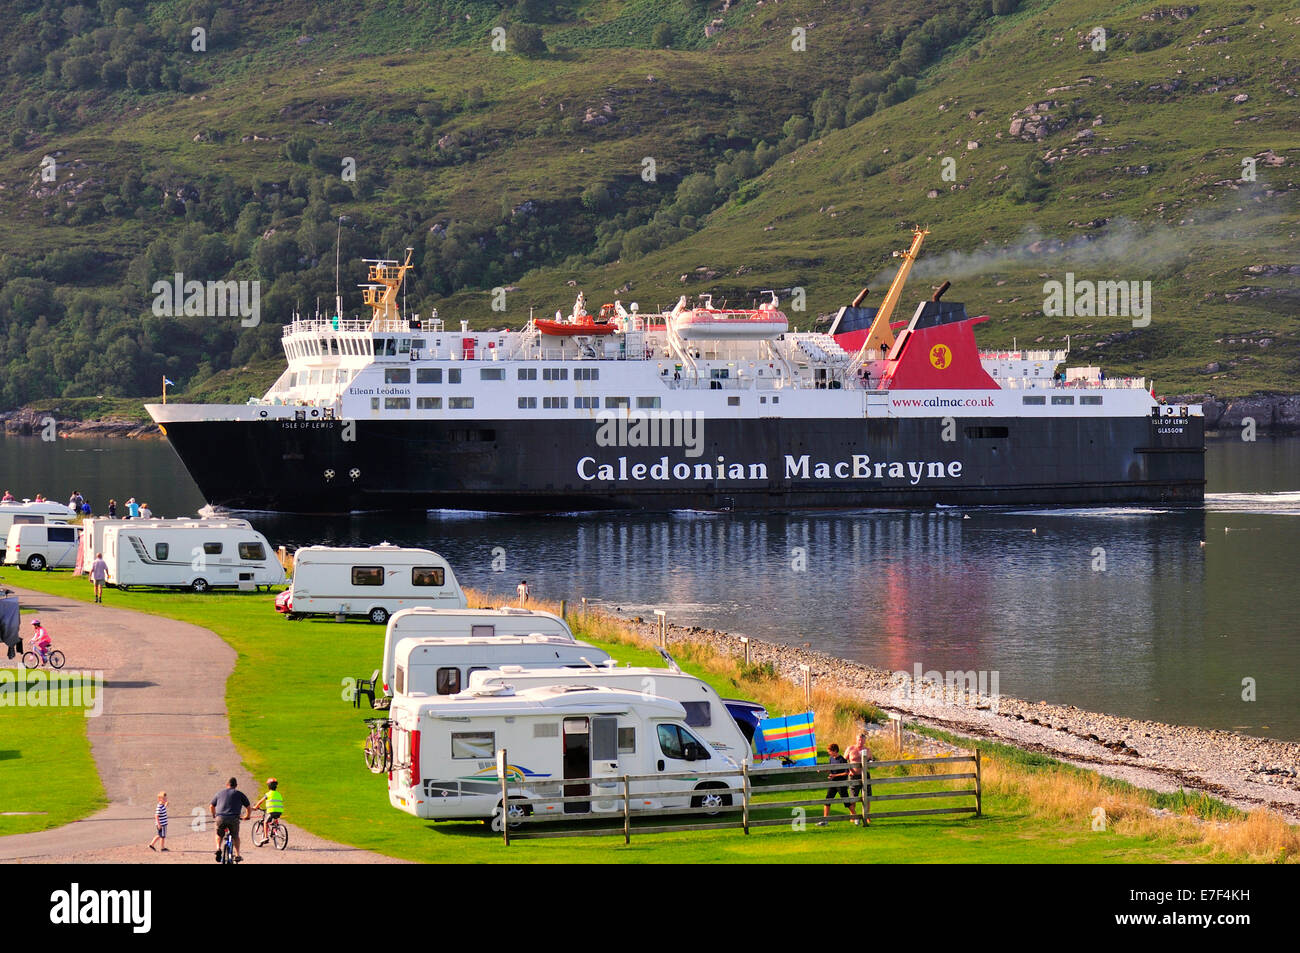 The ferry from Stornoway, Isle of Lewis in the Outer Hebrides, sailing past a camp site, Loch Broom towards Ullapool, Caithness Stock Photo